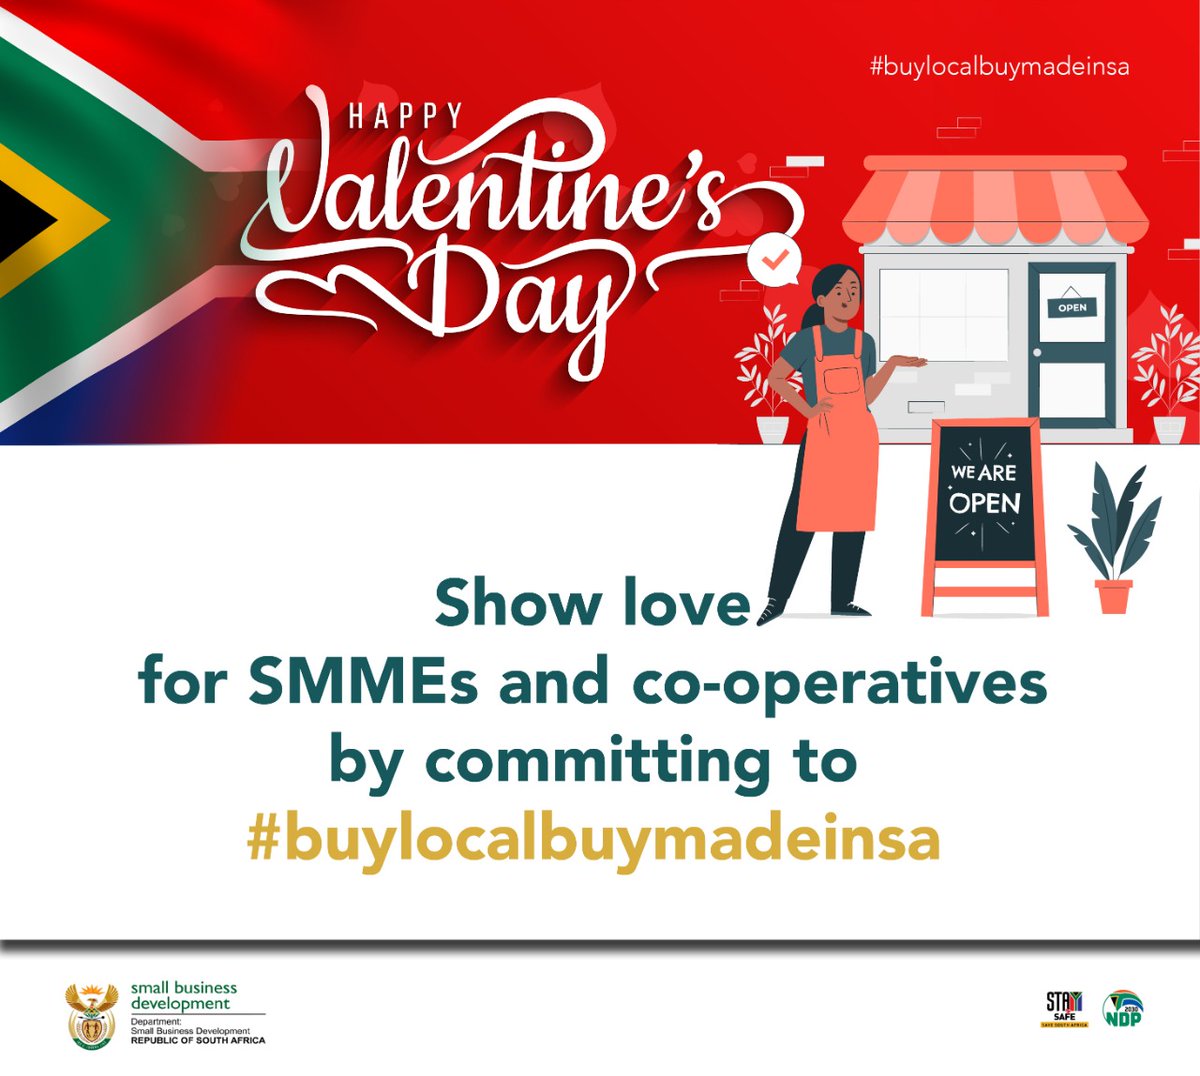 Show love for SMMEs and Co-operatives by committing to buy local!

#BuyLocalBuyMadeInSA
#LocalisLekker